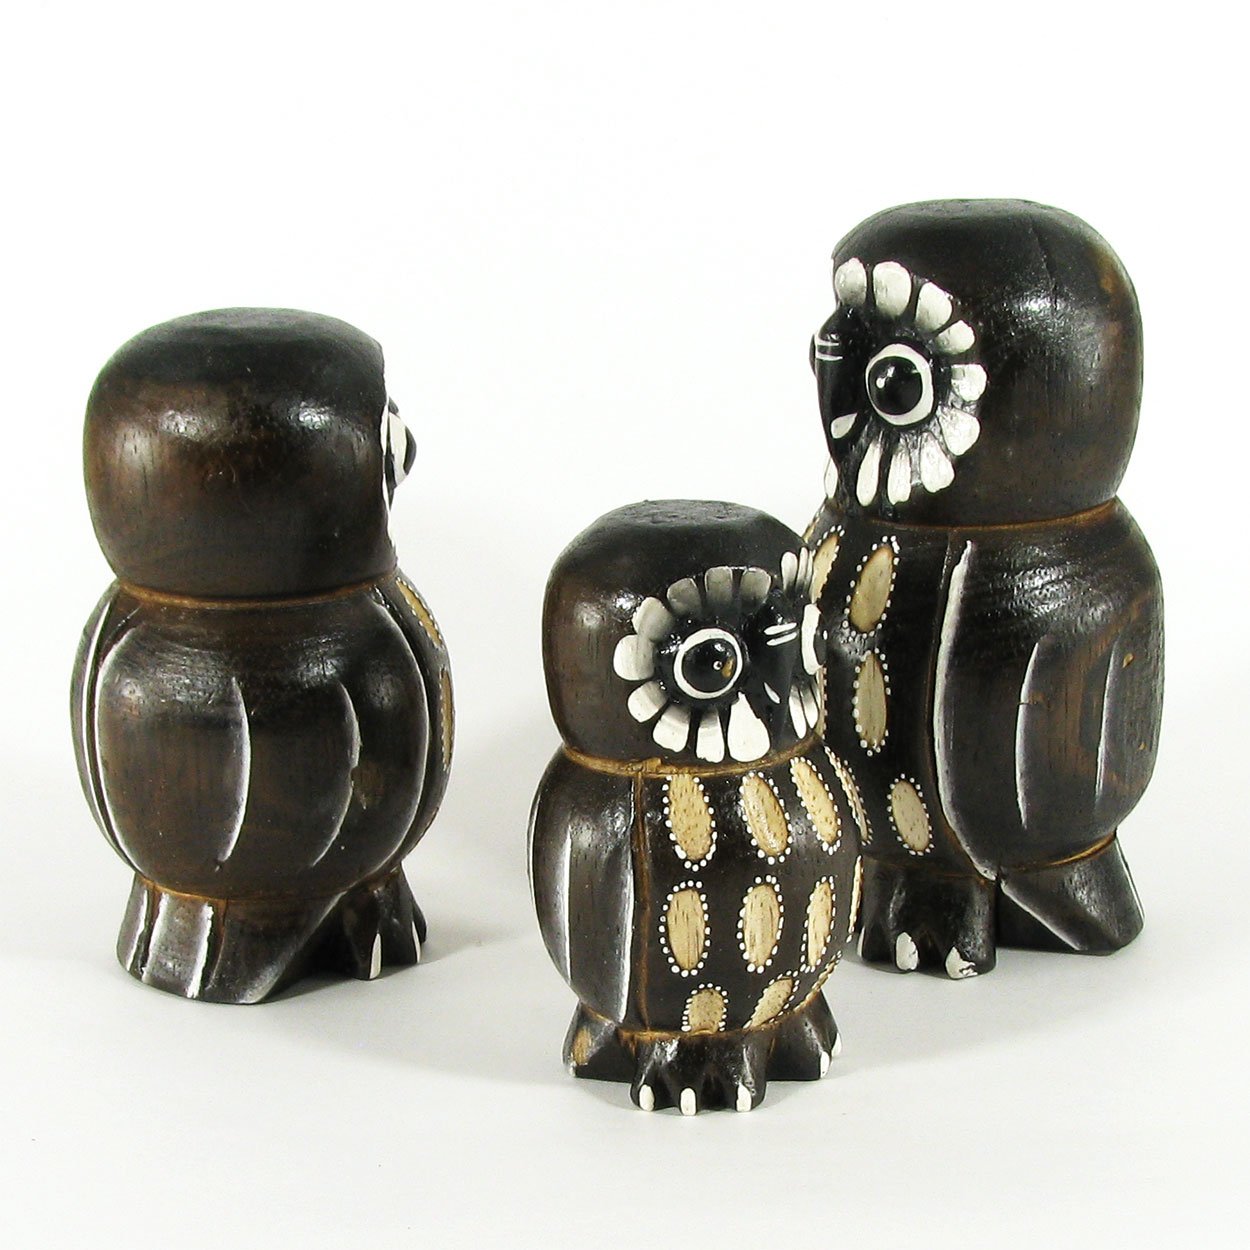 140039 - Set of Three 4-6in Owls Painted Rustic Wood Folk Art Carvings - Etched Ovals